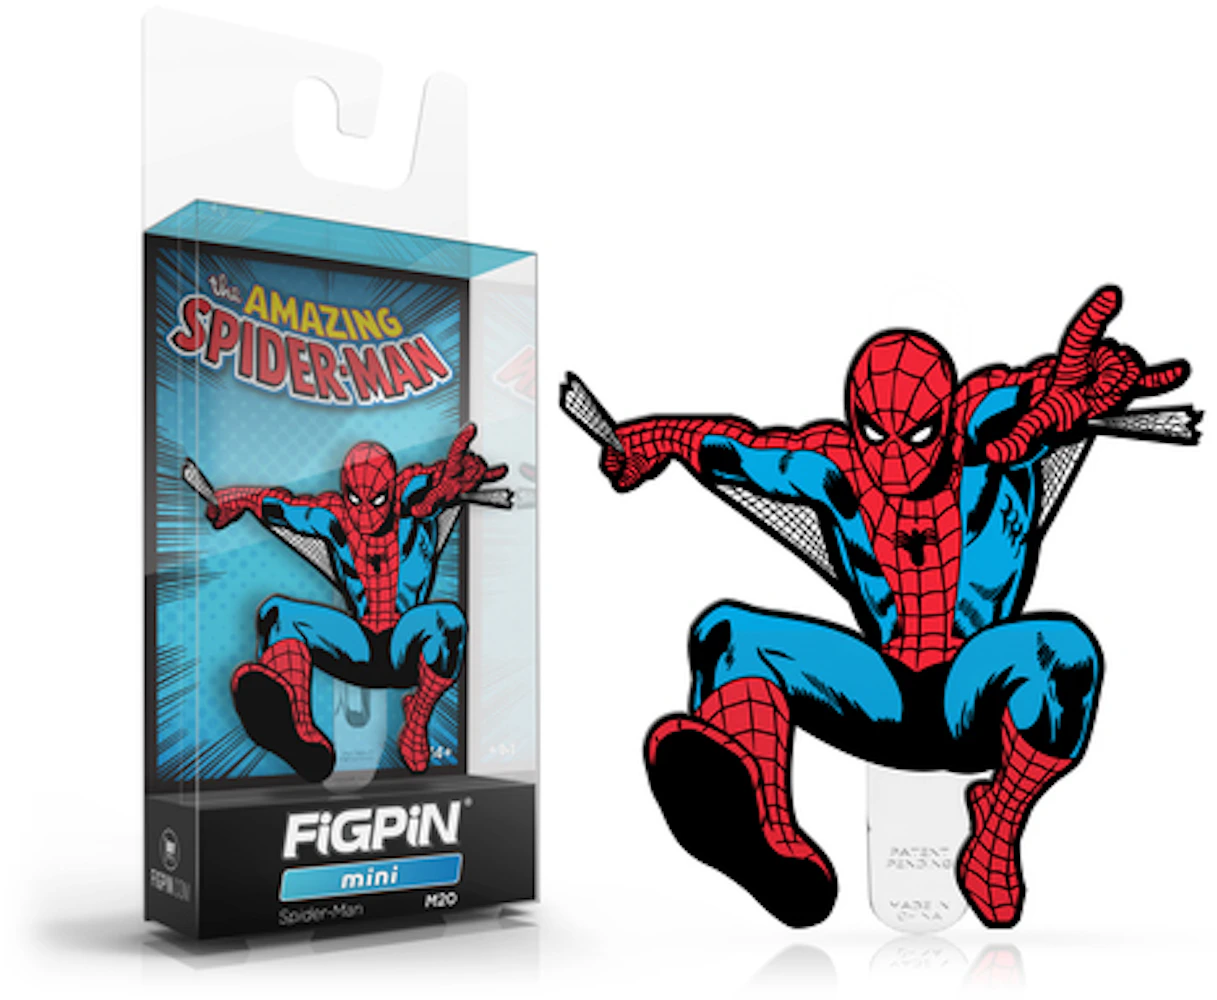 FiGPiN Mini The Amazing Spider-Man NYCC Exclusive Pin #M20 - US